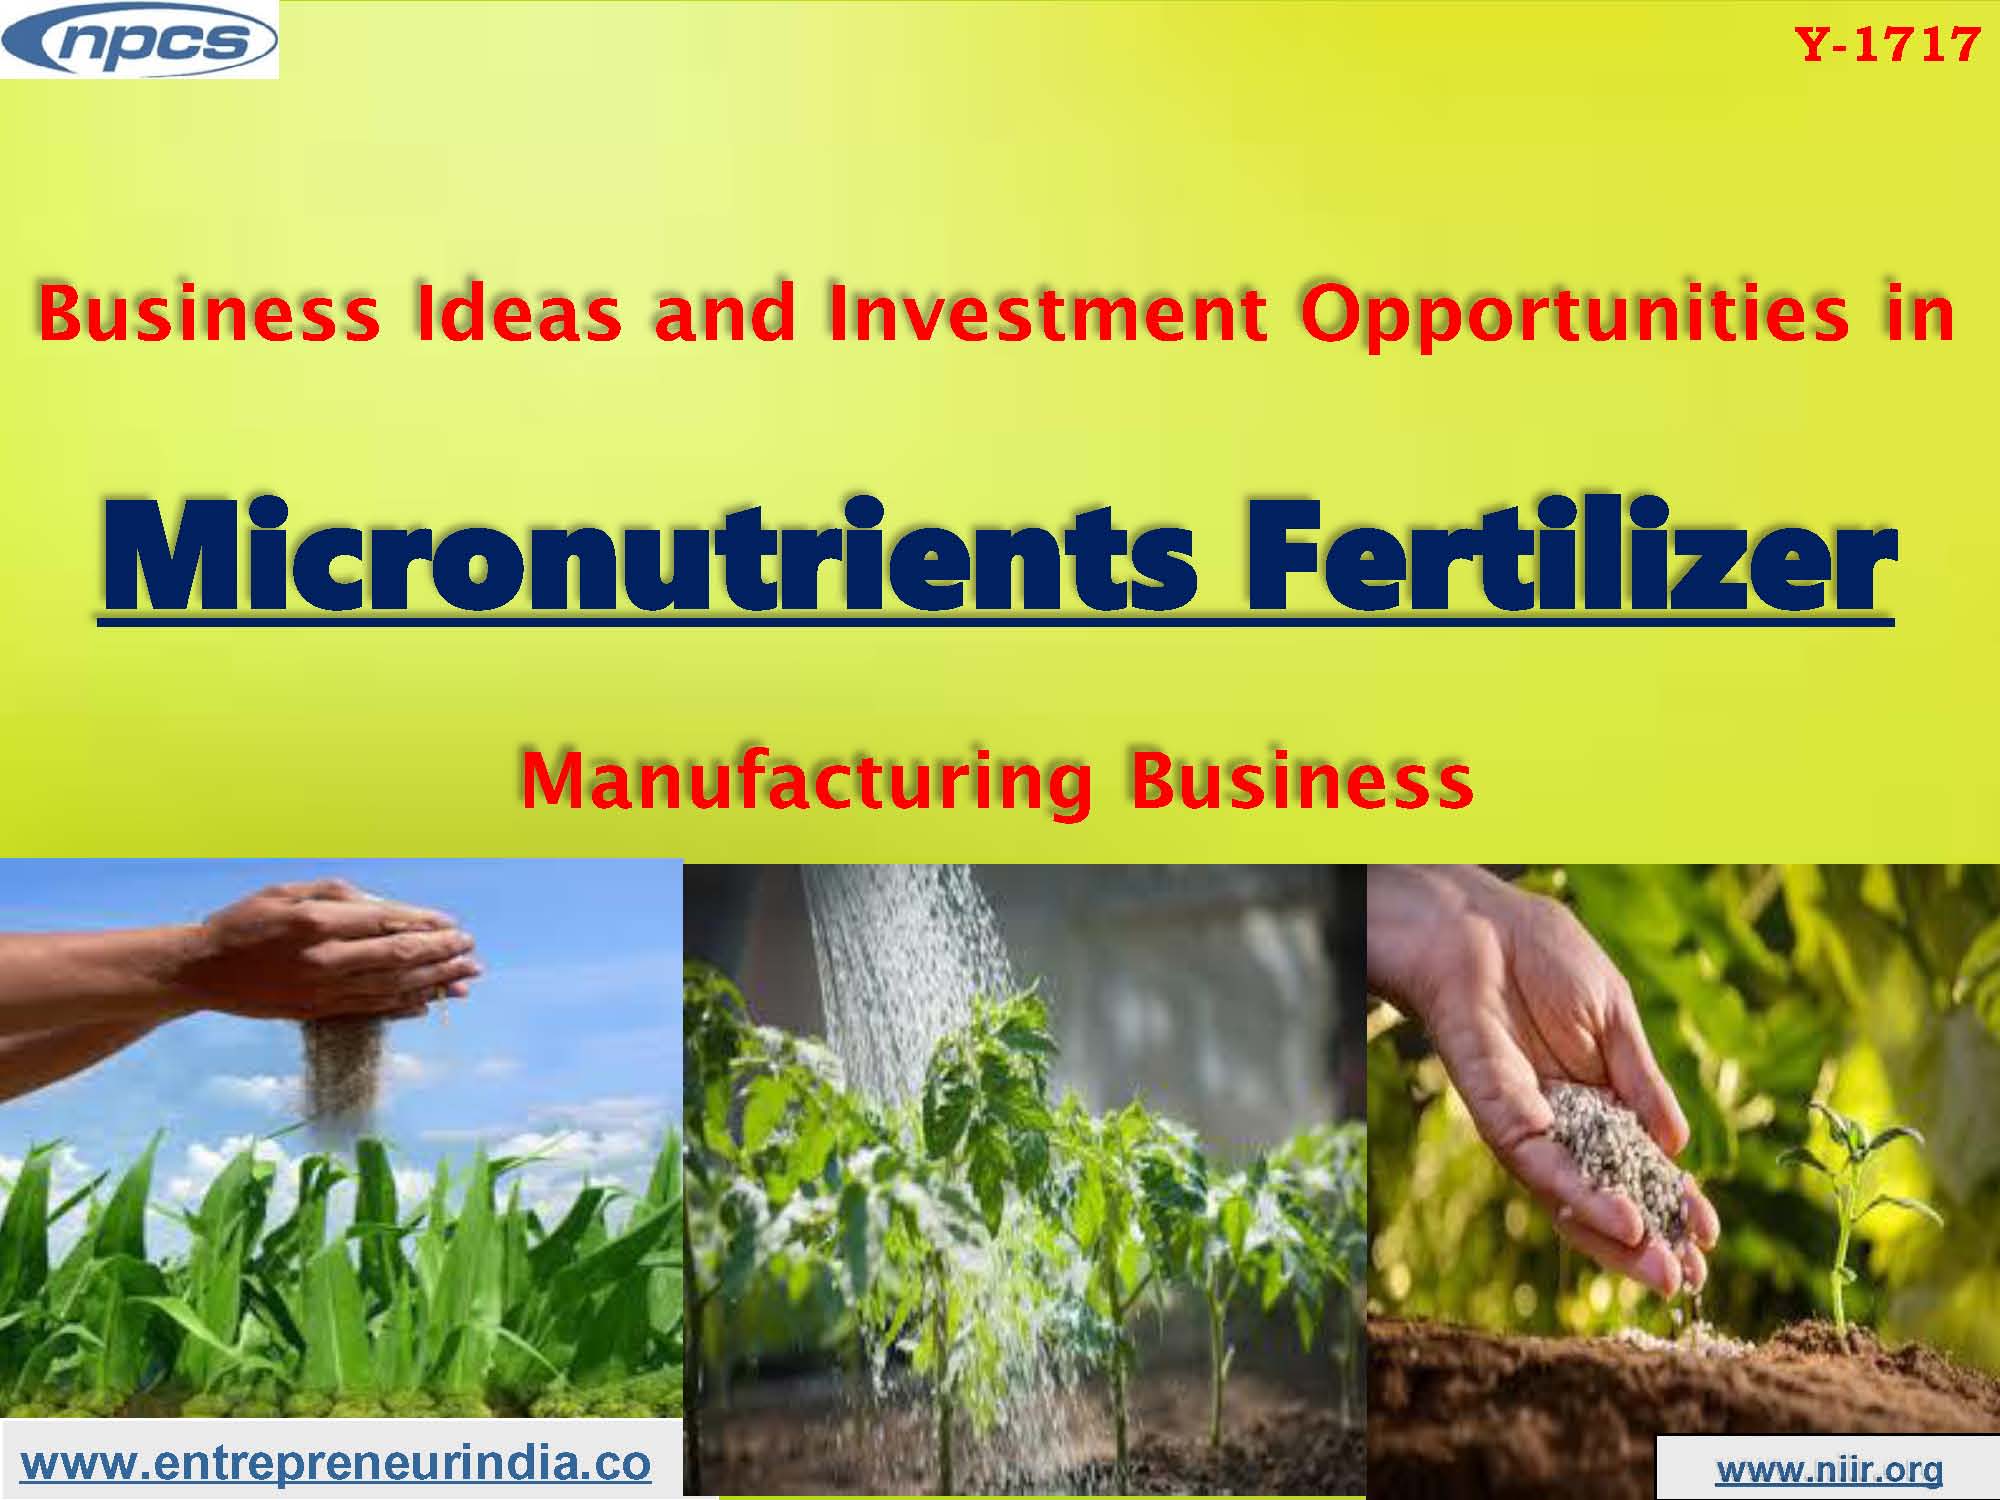 Business Ideas and Investment Opportunities in Micronutrients Fertilizer Manufacturing Business